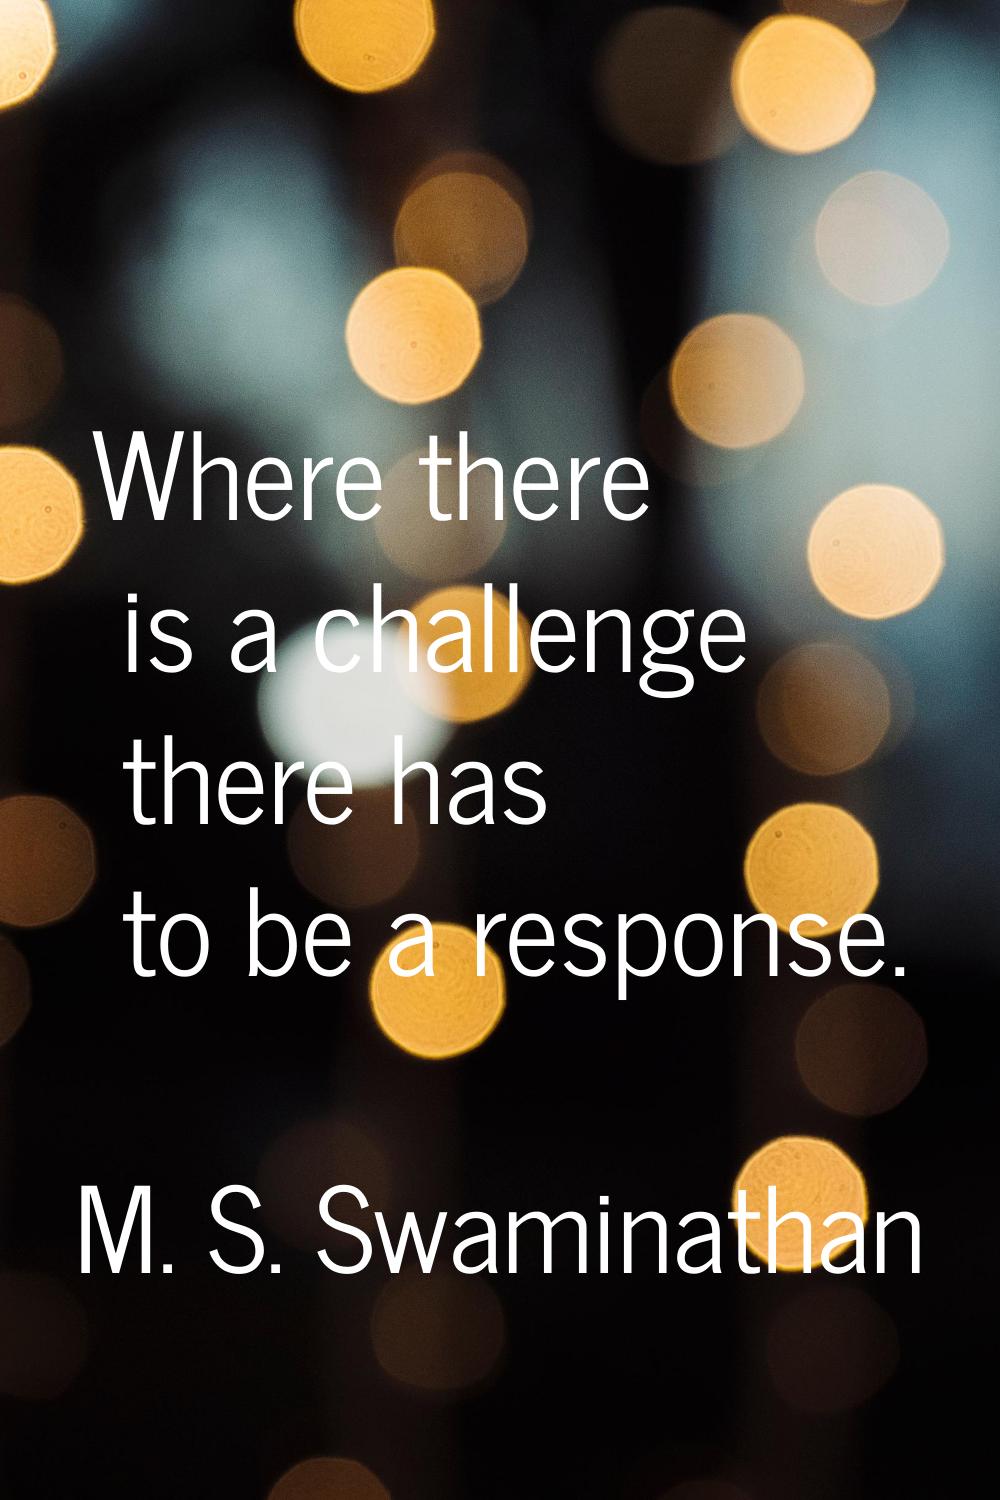 Where there is a challenge there has to be a response.